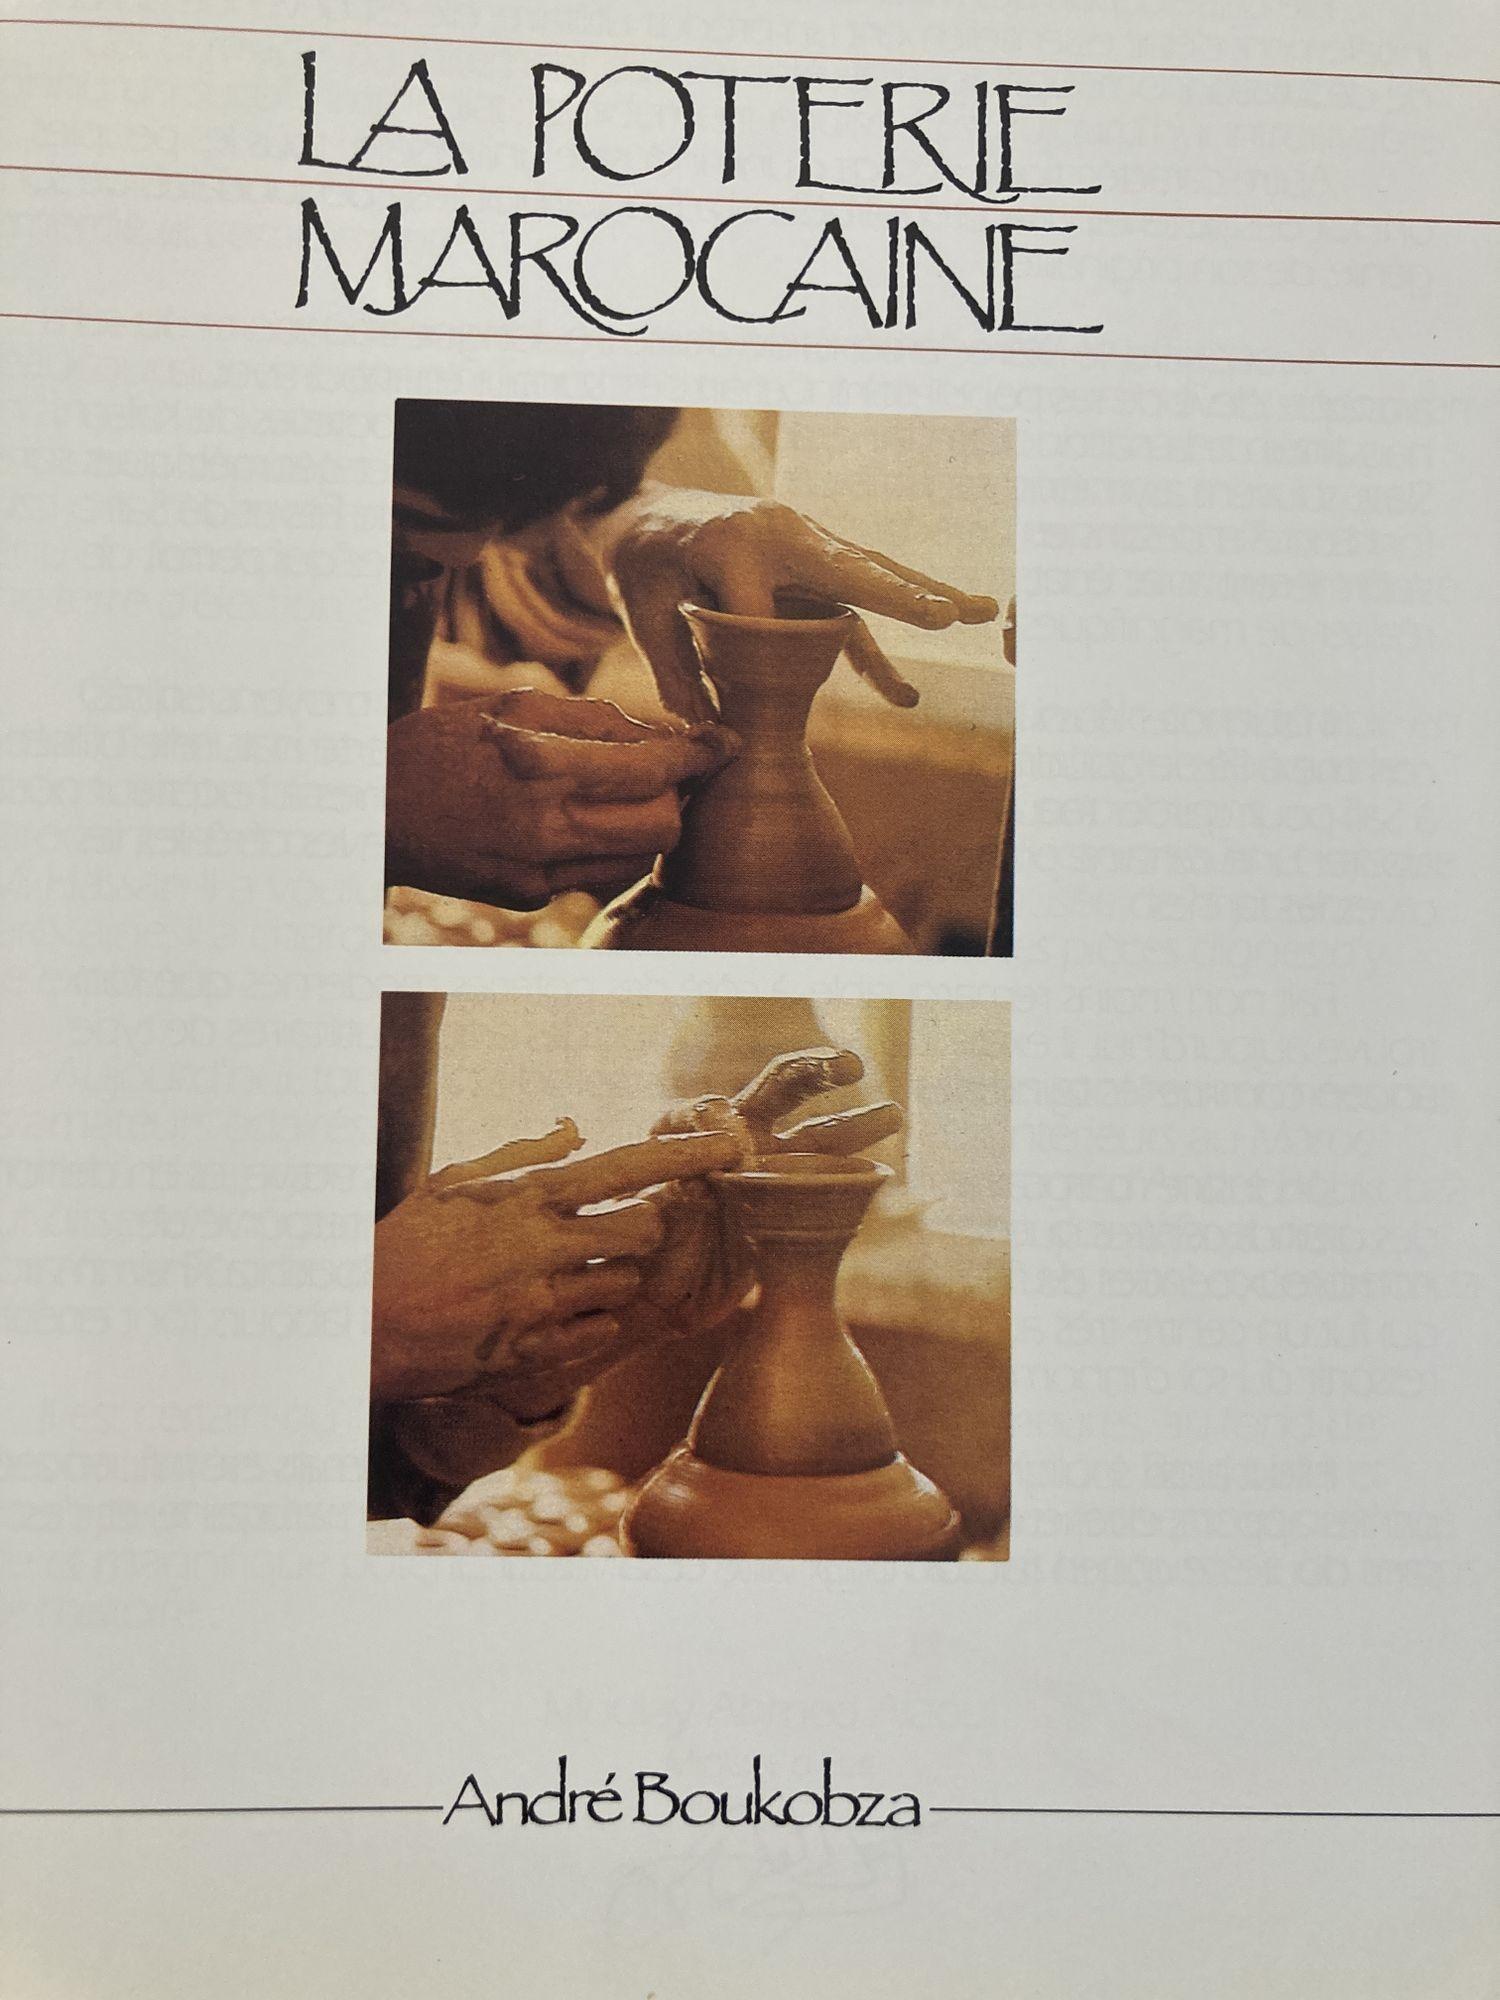 Moroccan Pottery La Poterie Marocaine by André Boukobza French Edition Hard For Sale 3